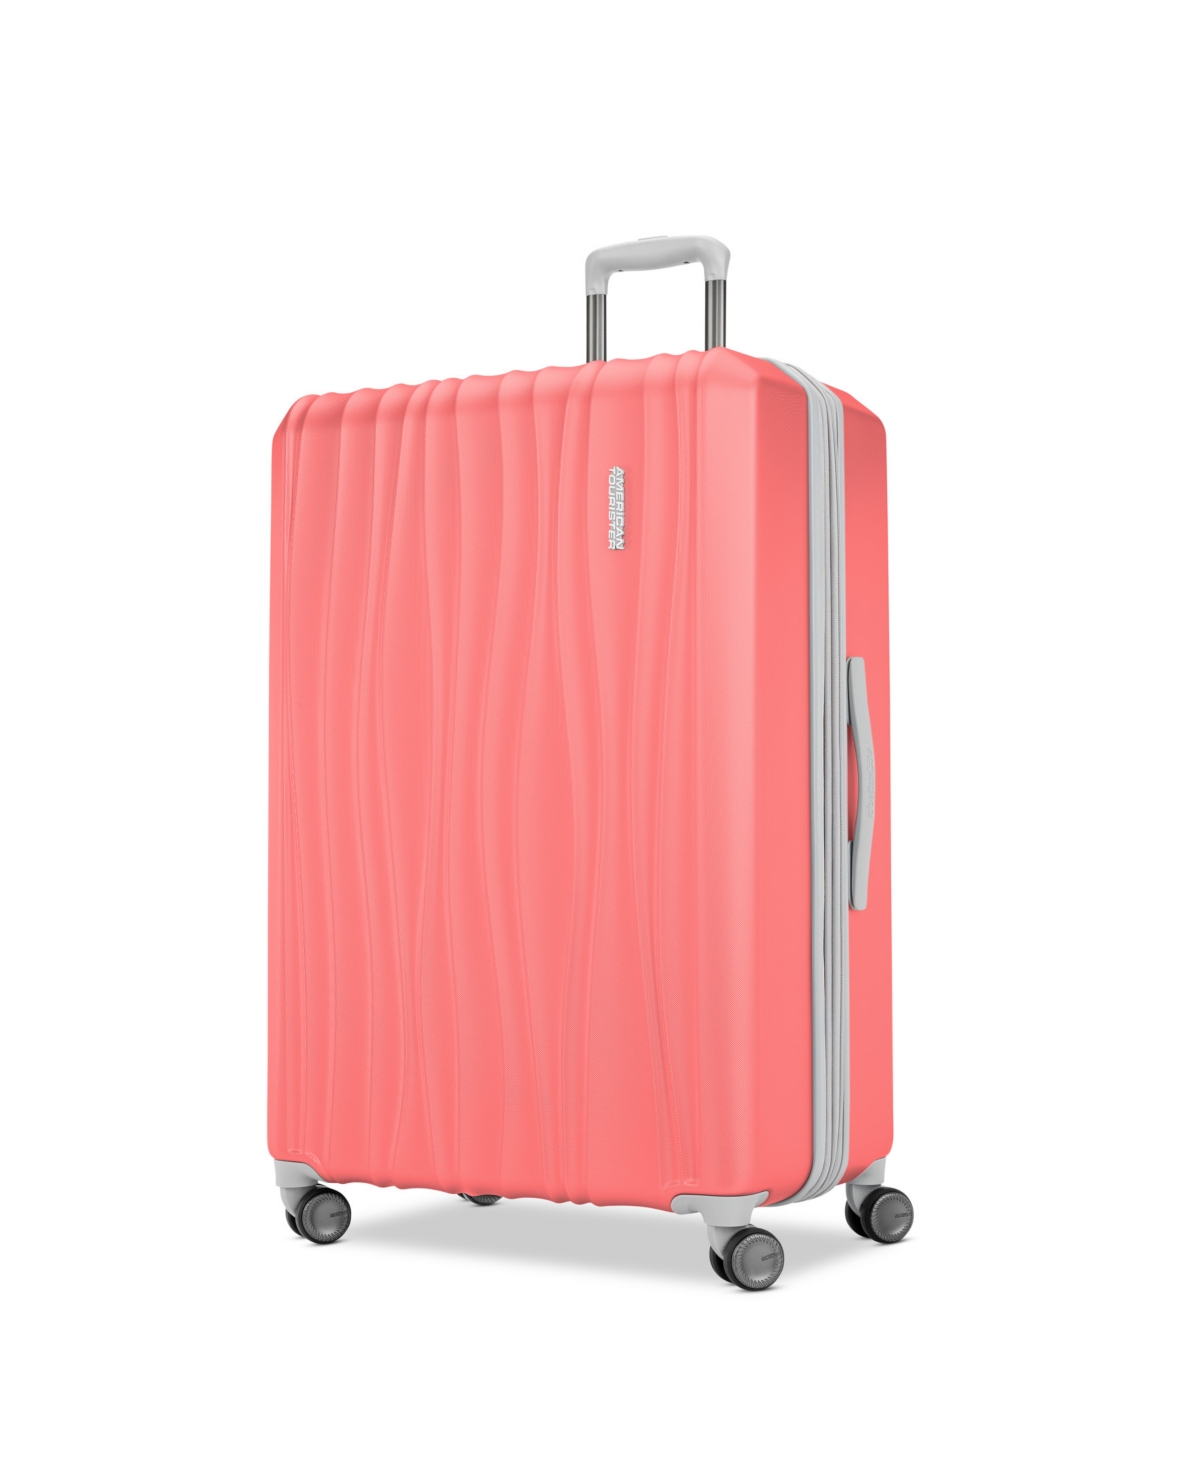 American Tourister Tribute Encore Hardside Check-in 28" Spinner Luggage In Soft Coral